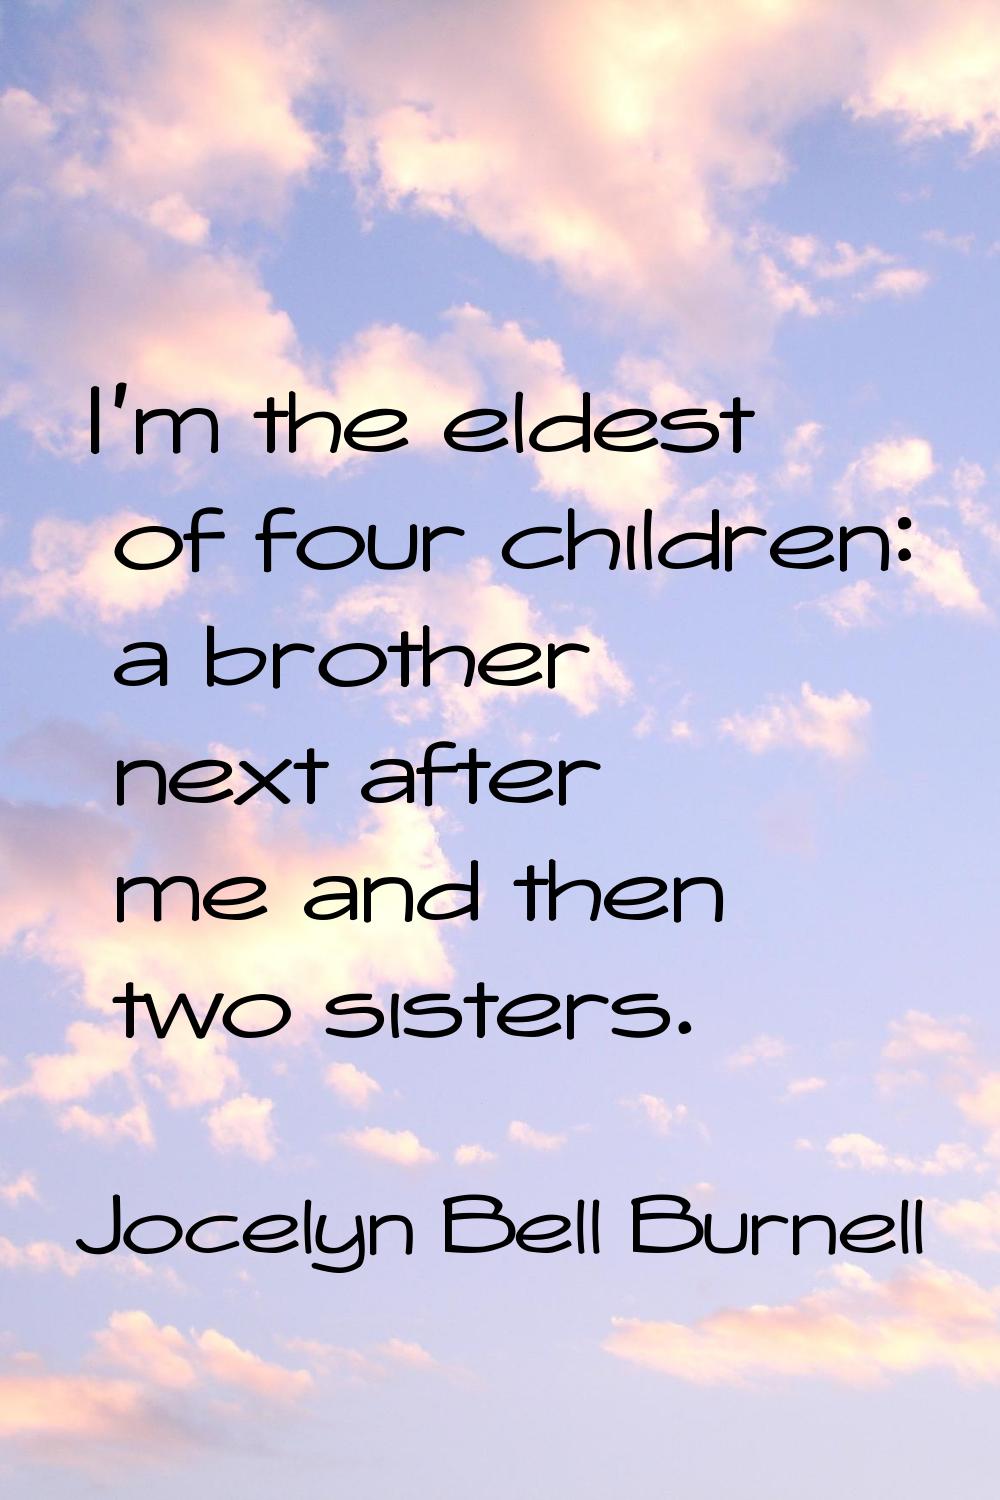 I'm the eldest of four children: a brother next after me and then two sisters.